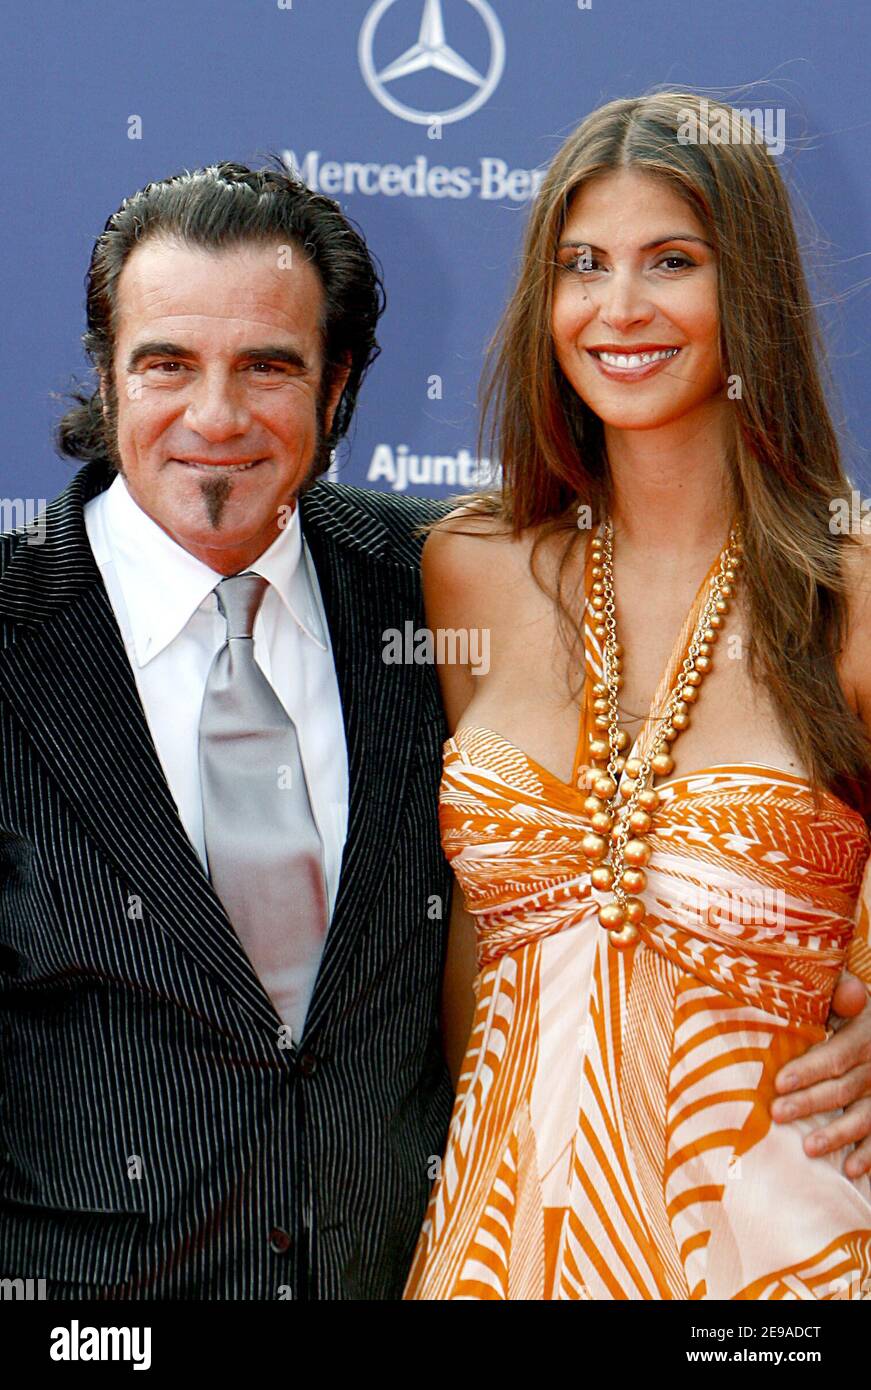 Bon Jovi drummer Tico Torres arrives with partner at the Laureus World Sports Awards 2006, at the Parc del Forum, Barcelona, Spain on May 22, 2006.Photo by Patrick Bernard/ABACAPRESS.COM Stock Photo